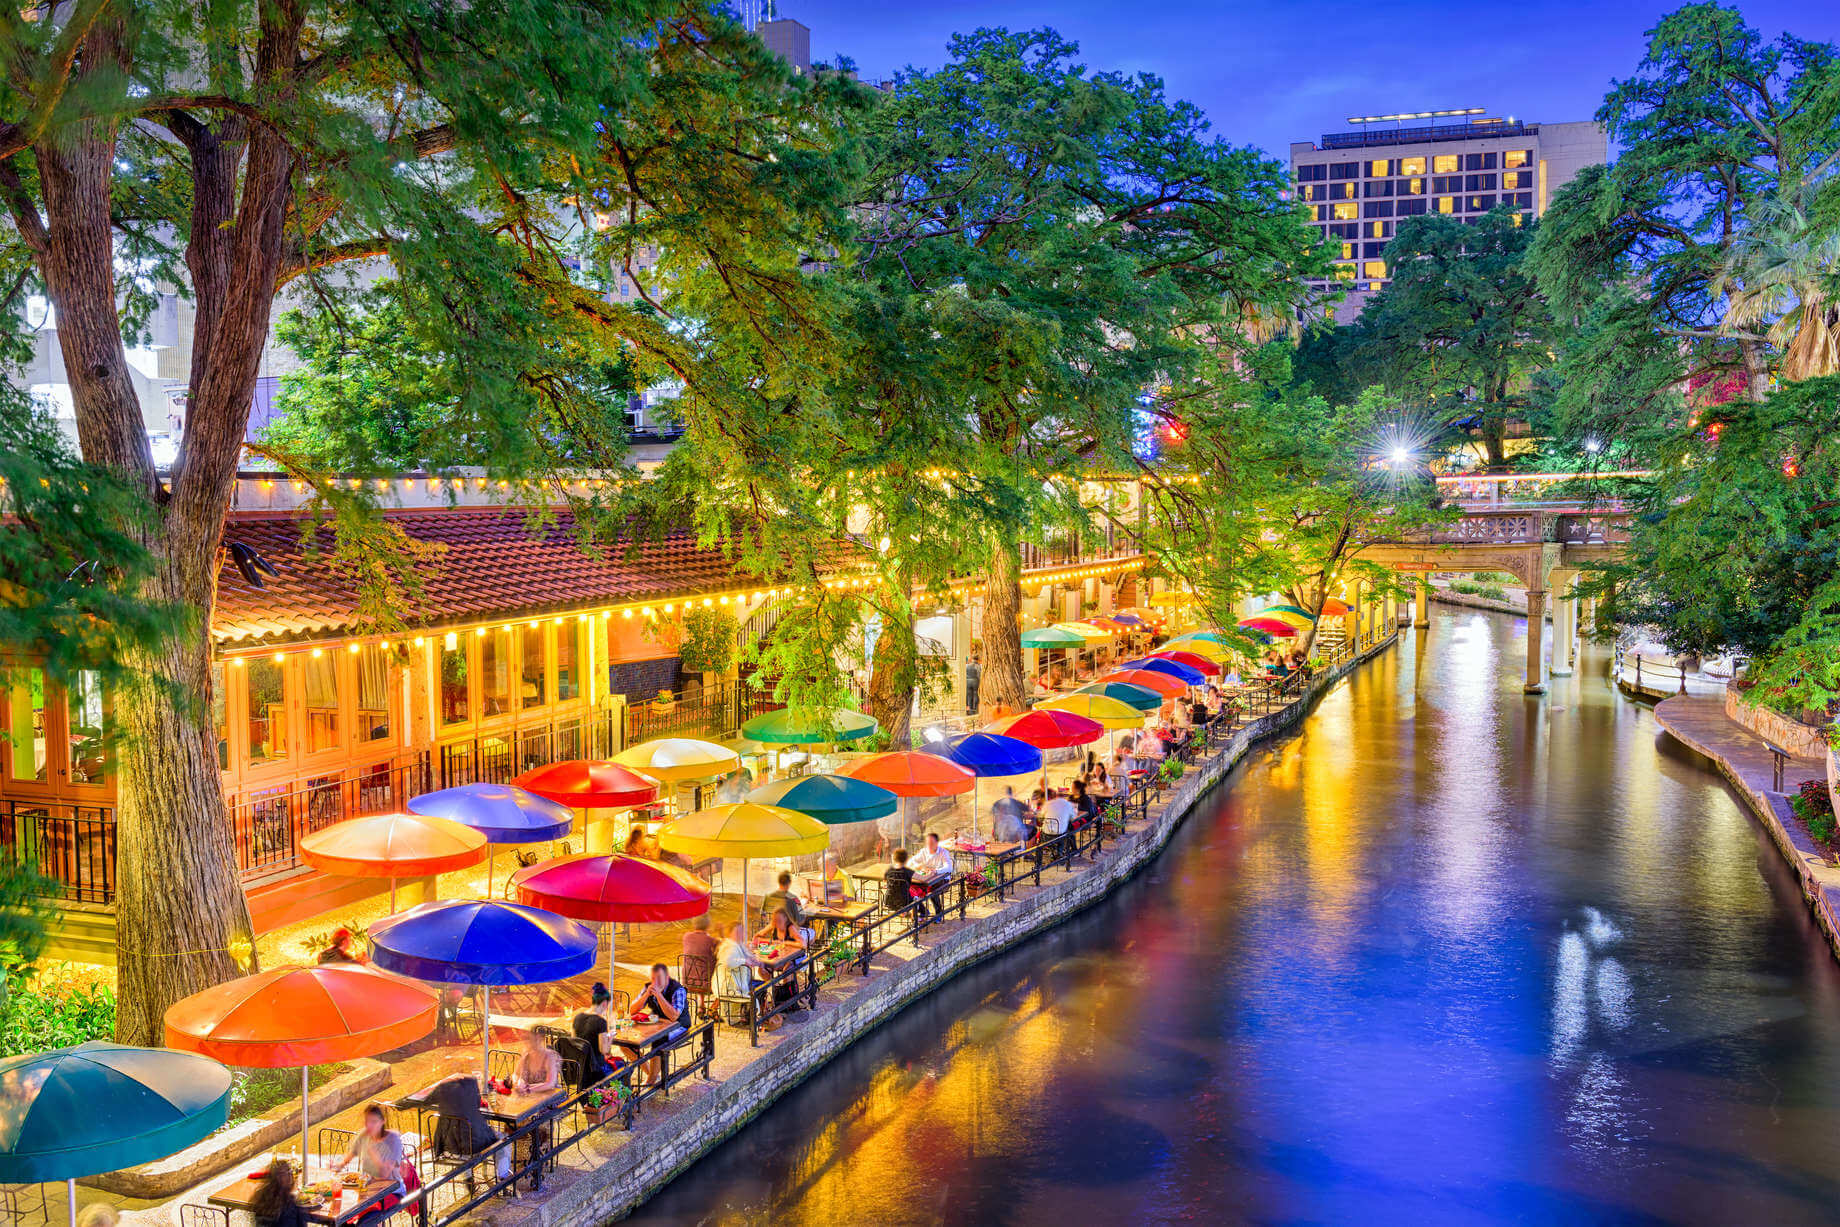 San Antonio Family Vacation Packages Travel Packages to San Antonio Texas